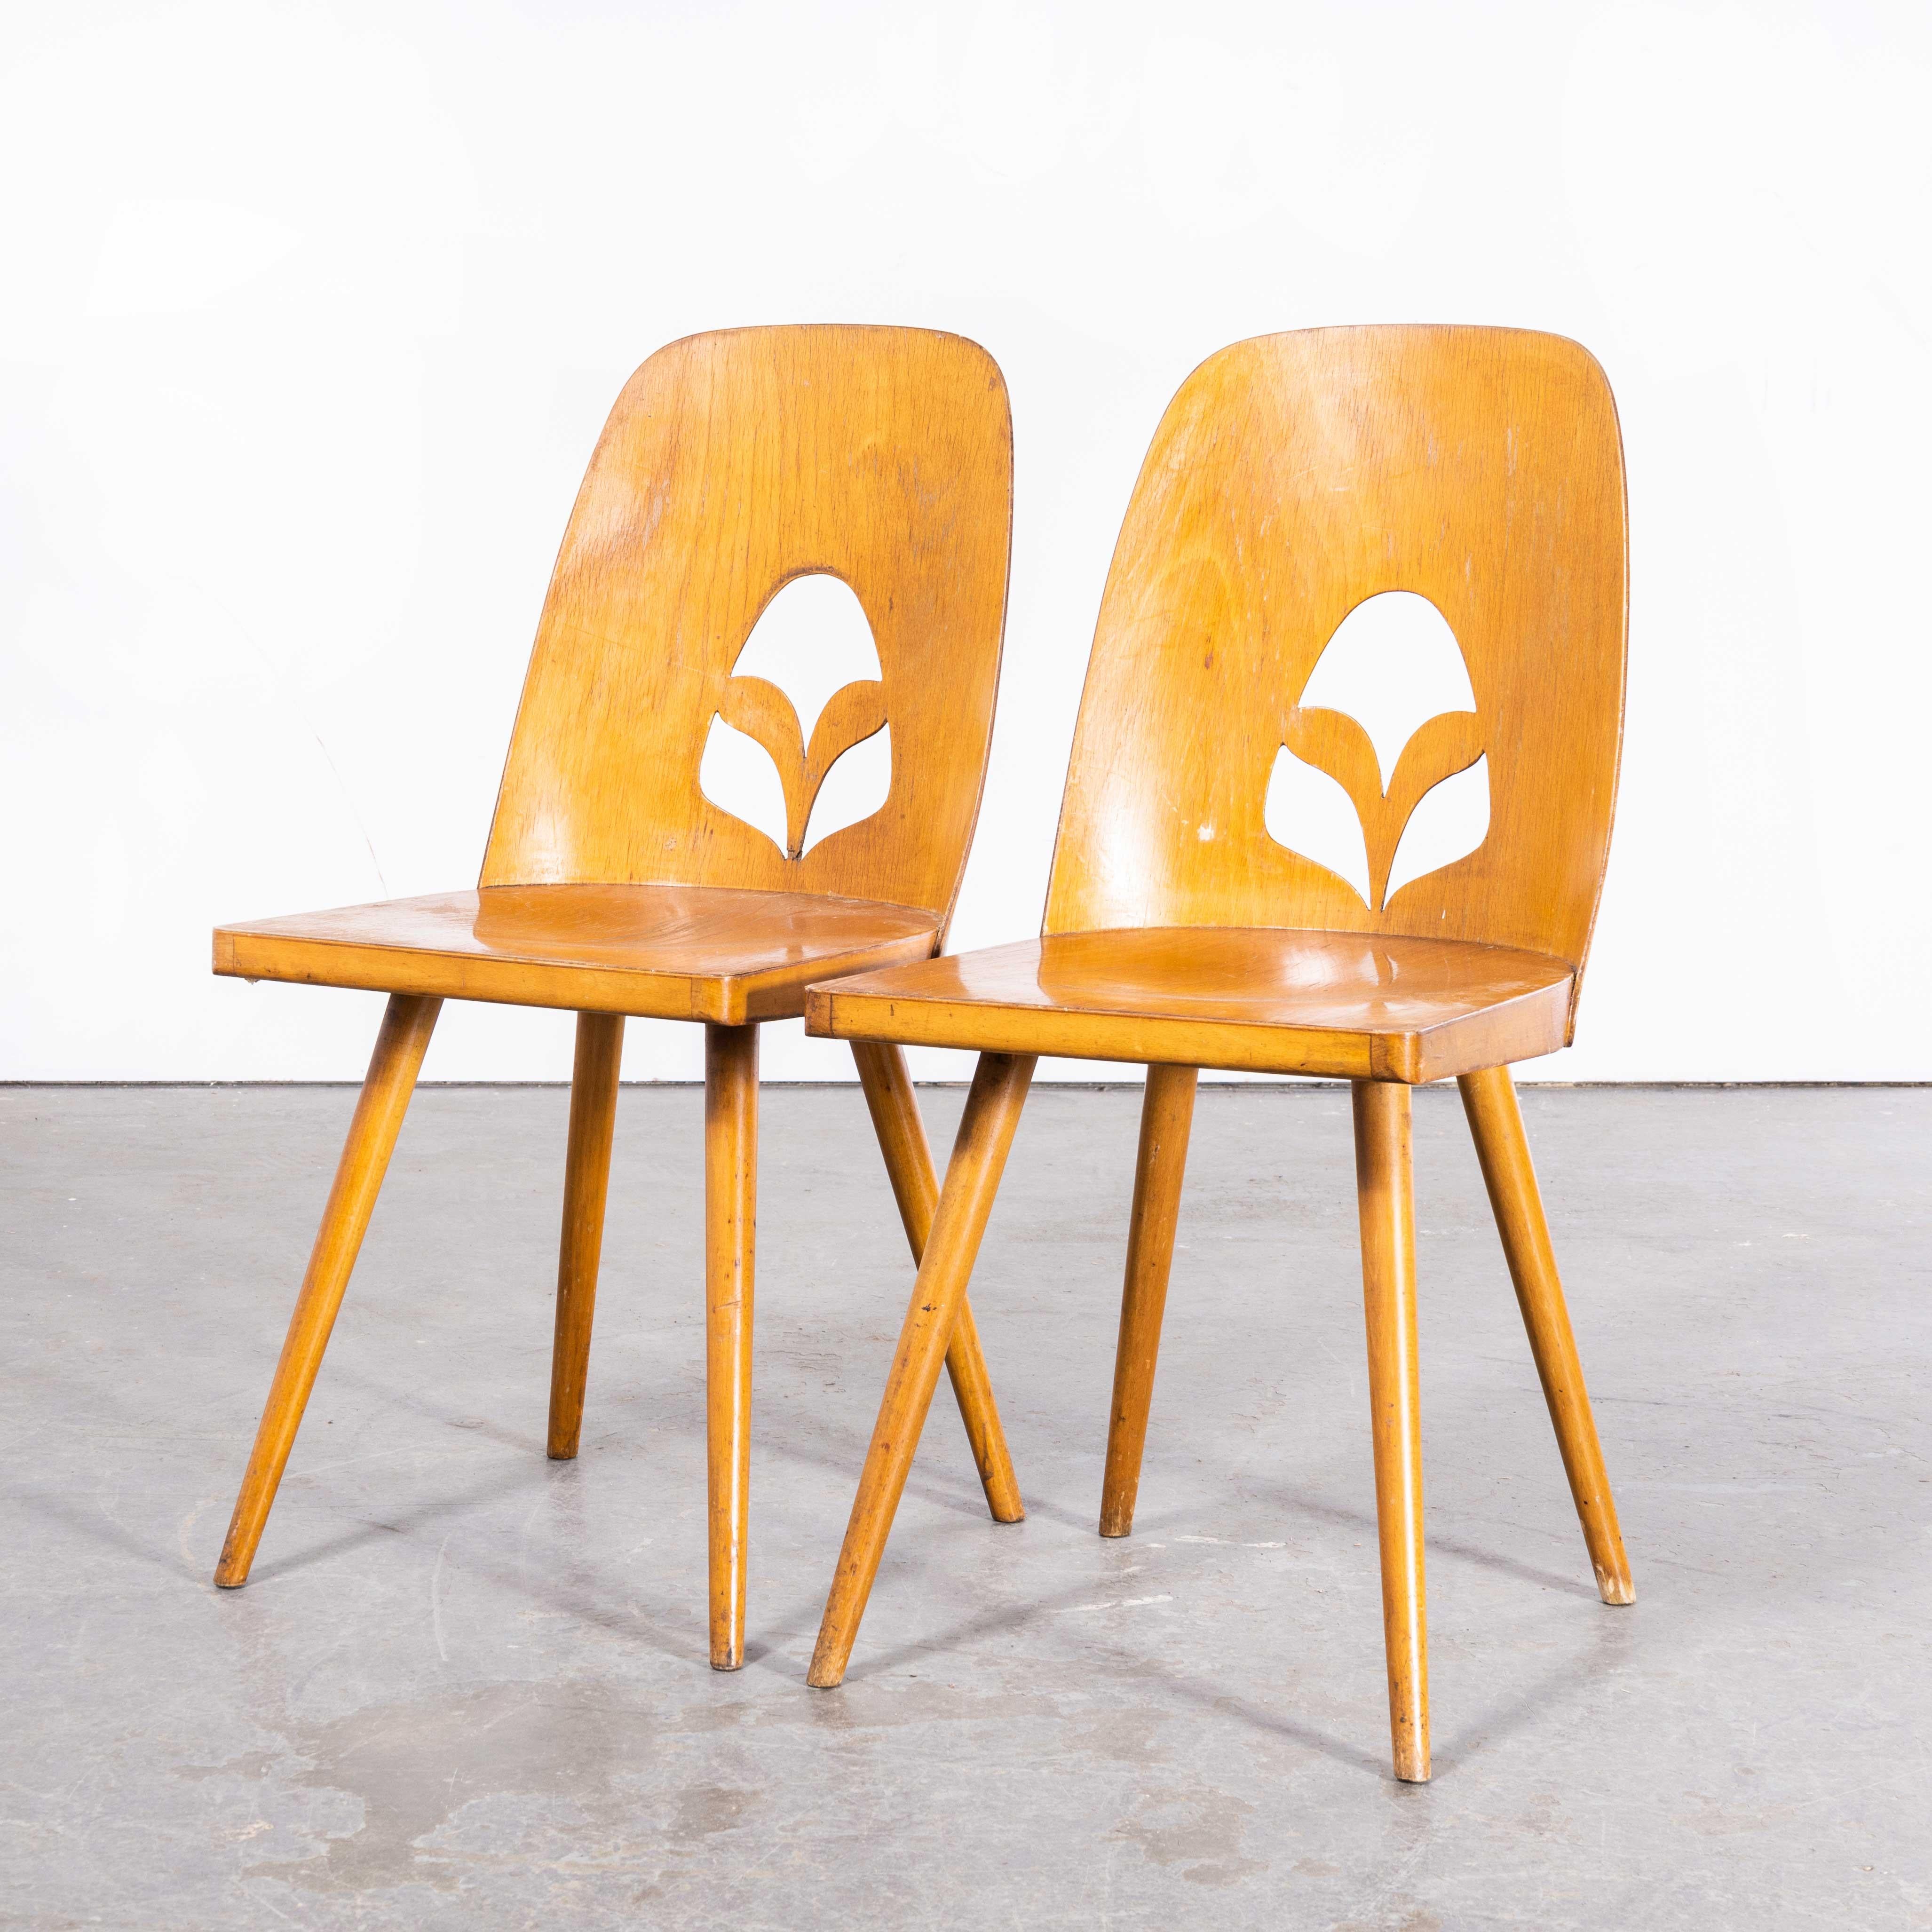 Mid-20th Century 1950s Fretwork Detail Dining Chairs by Radomir Hoffman, Pair For Sale